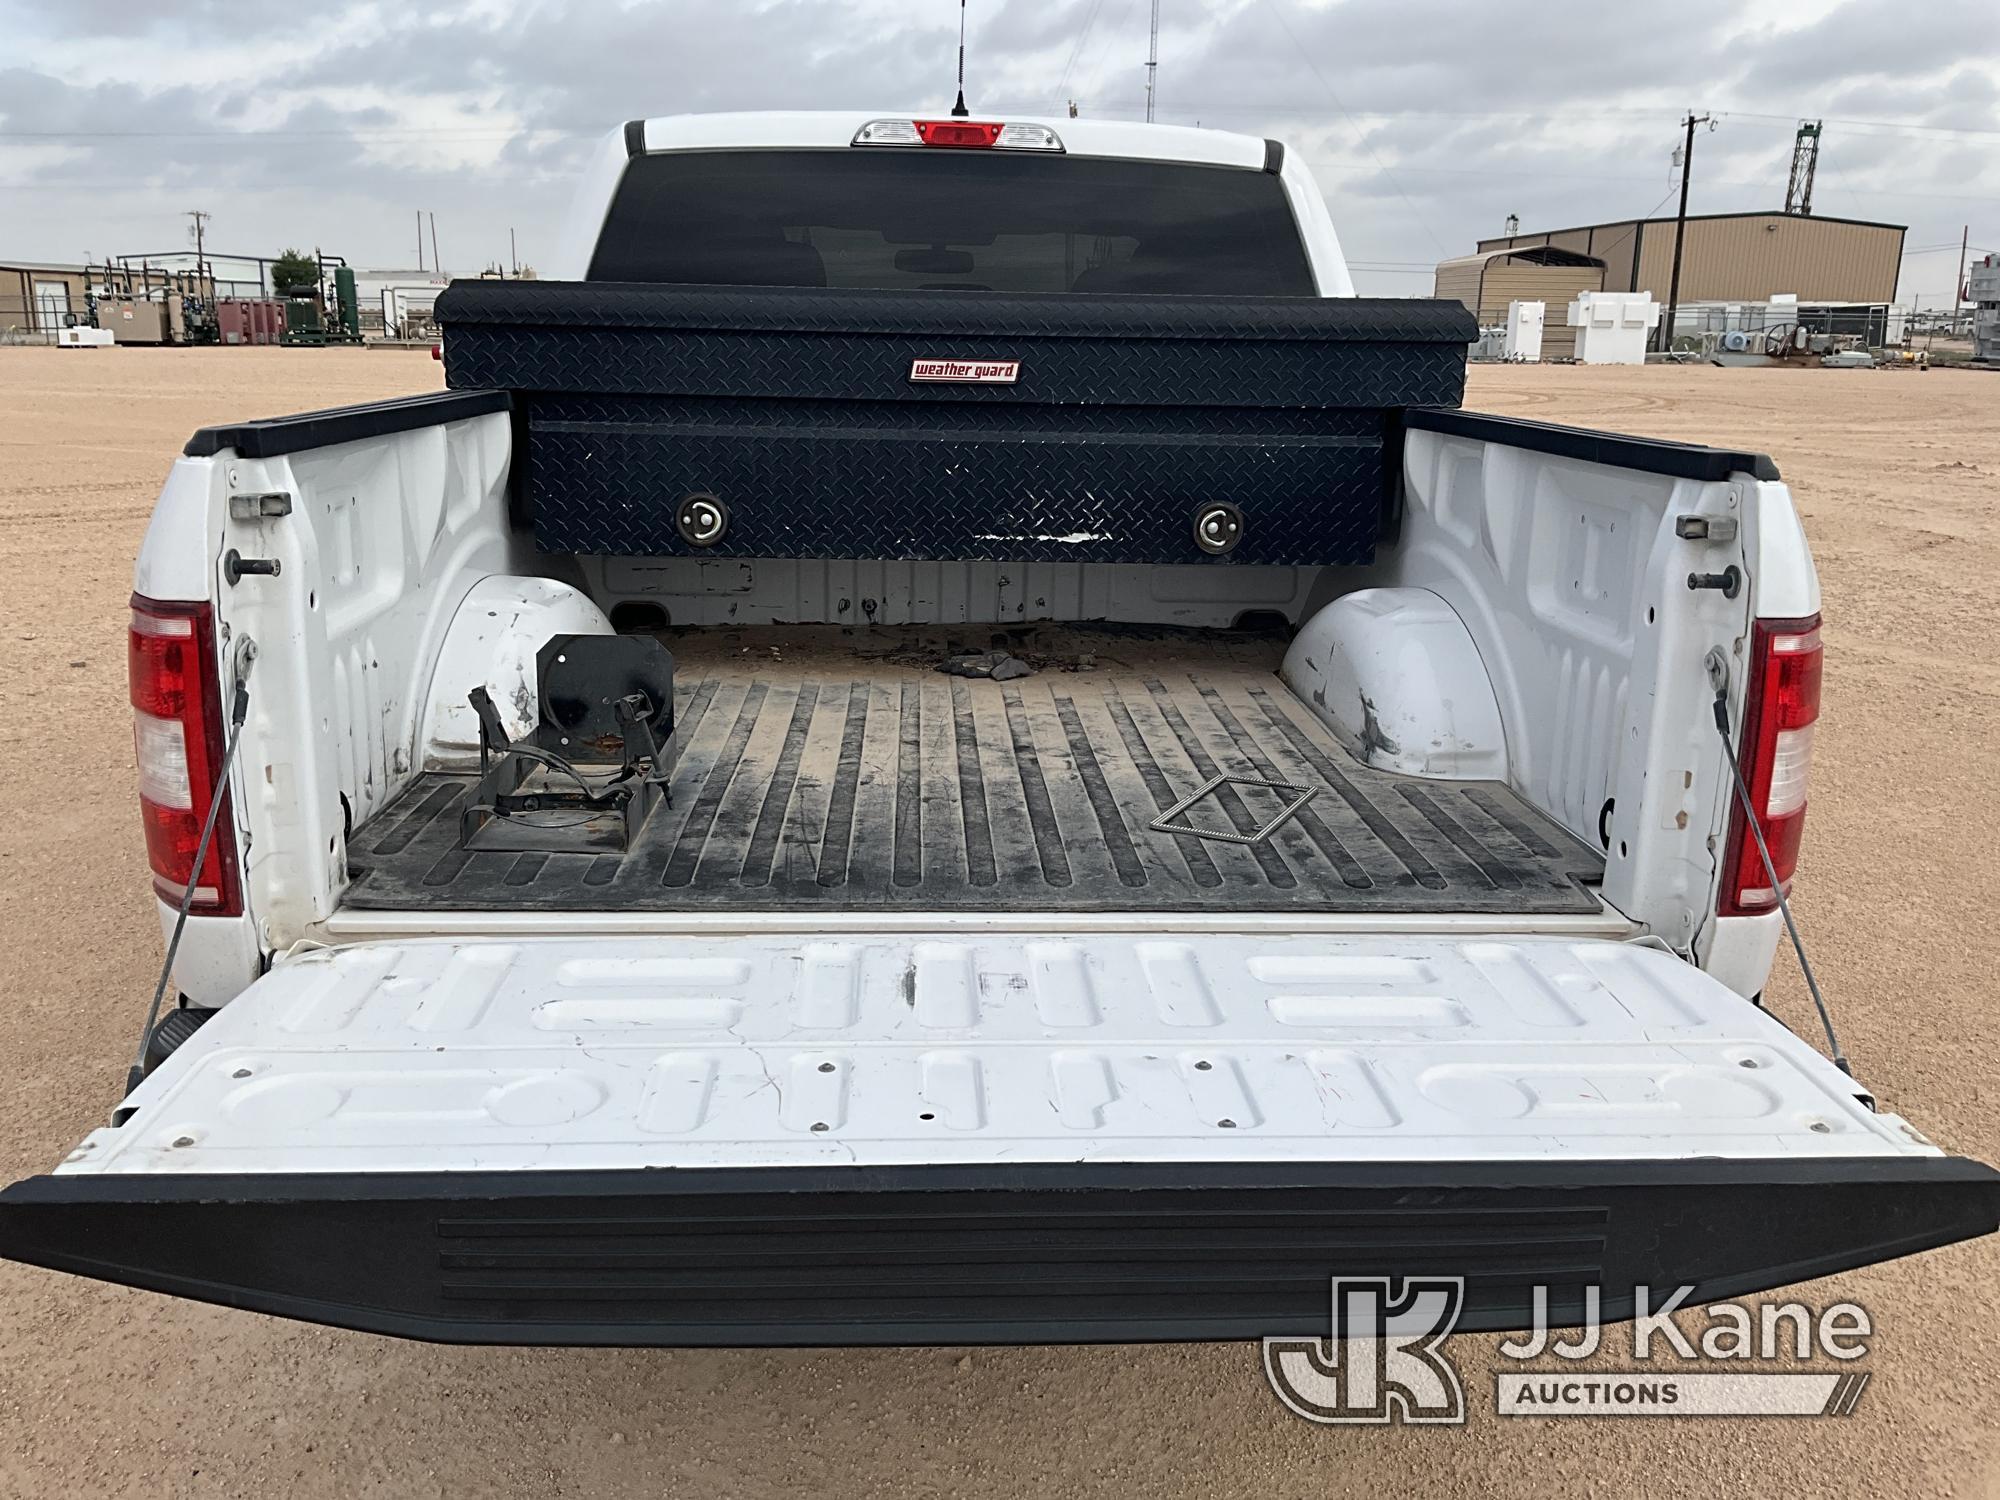 (Midland, TX) 2018 Ford F150 4x4 Crew-Cab Pickup Truck Not Running, Condition Unknown) (Will Crank,